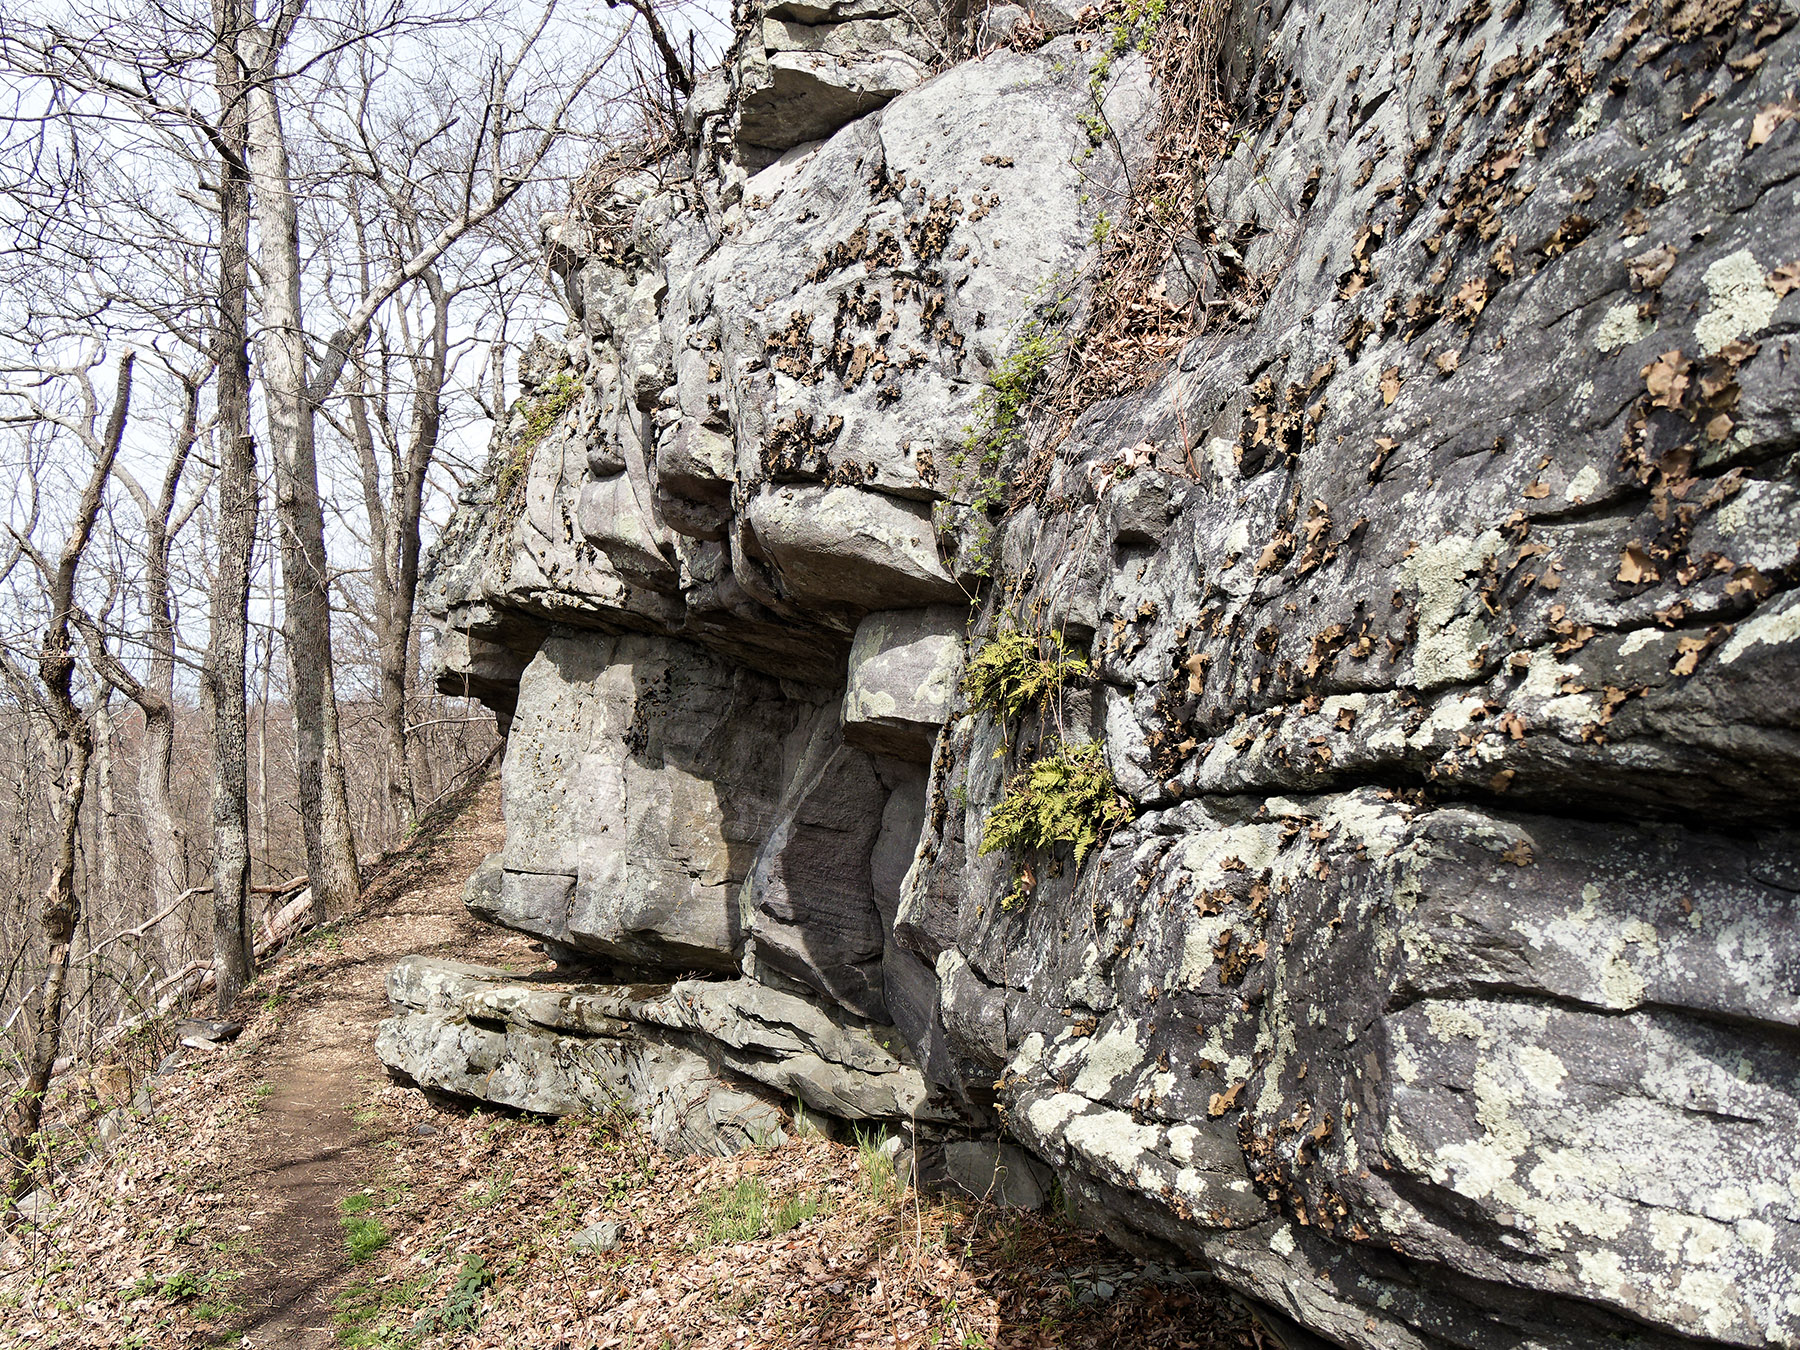 Ledge of quartzite and phyllite next to Appalachian trail 0.5 mile South of Doyles River Overlook.